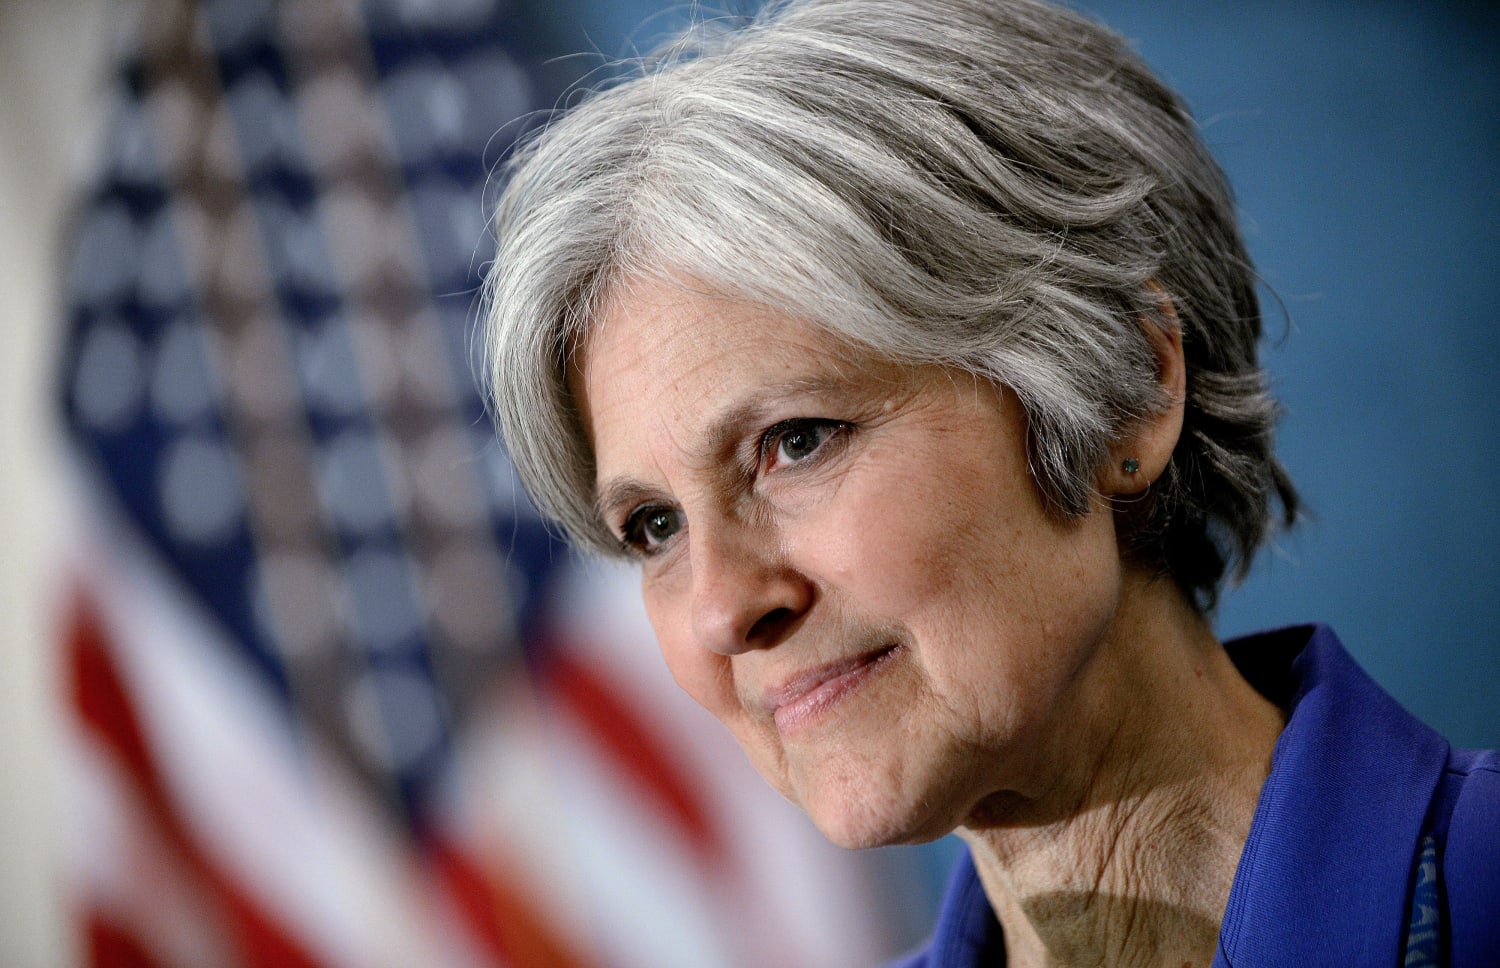 Dr. Jill Stein: Americans Are SICK of “Empire and Oligarchy”